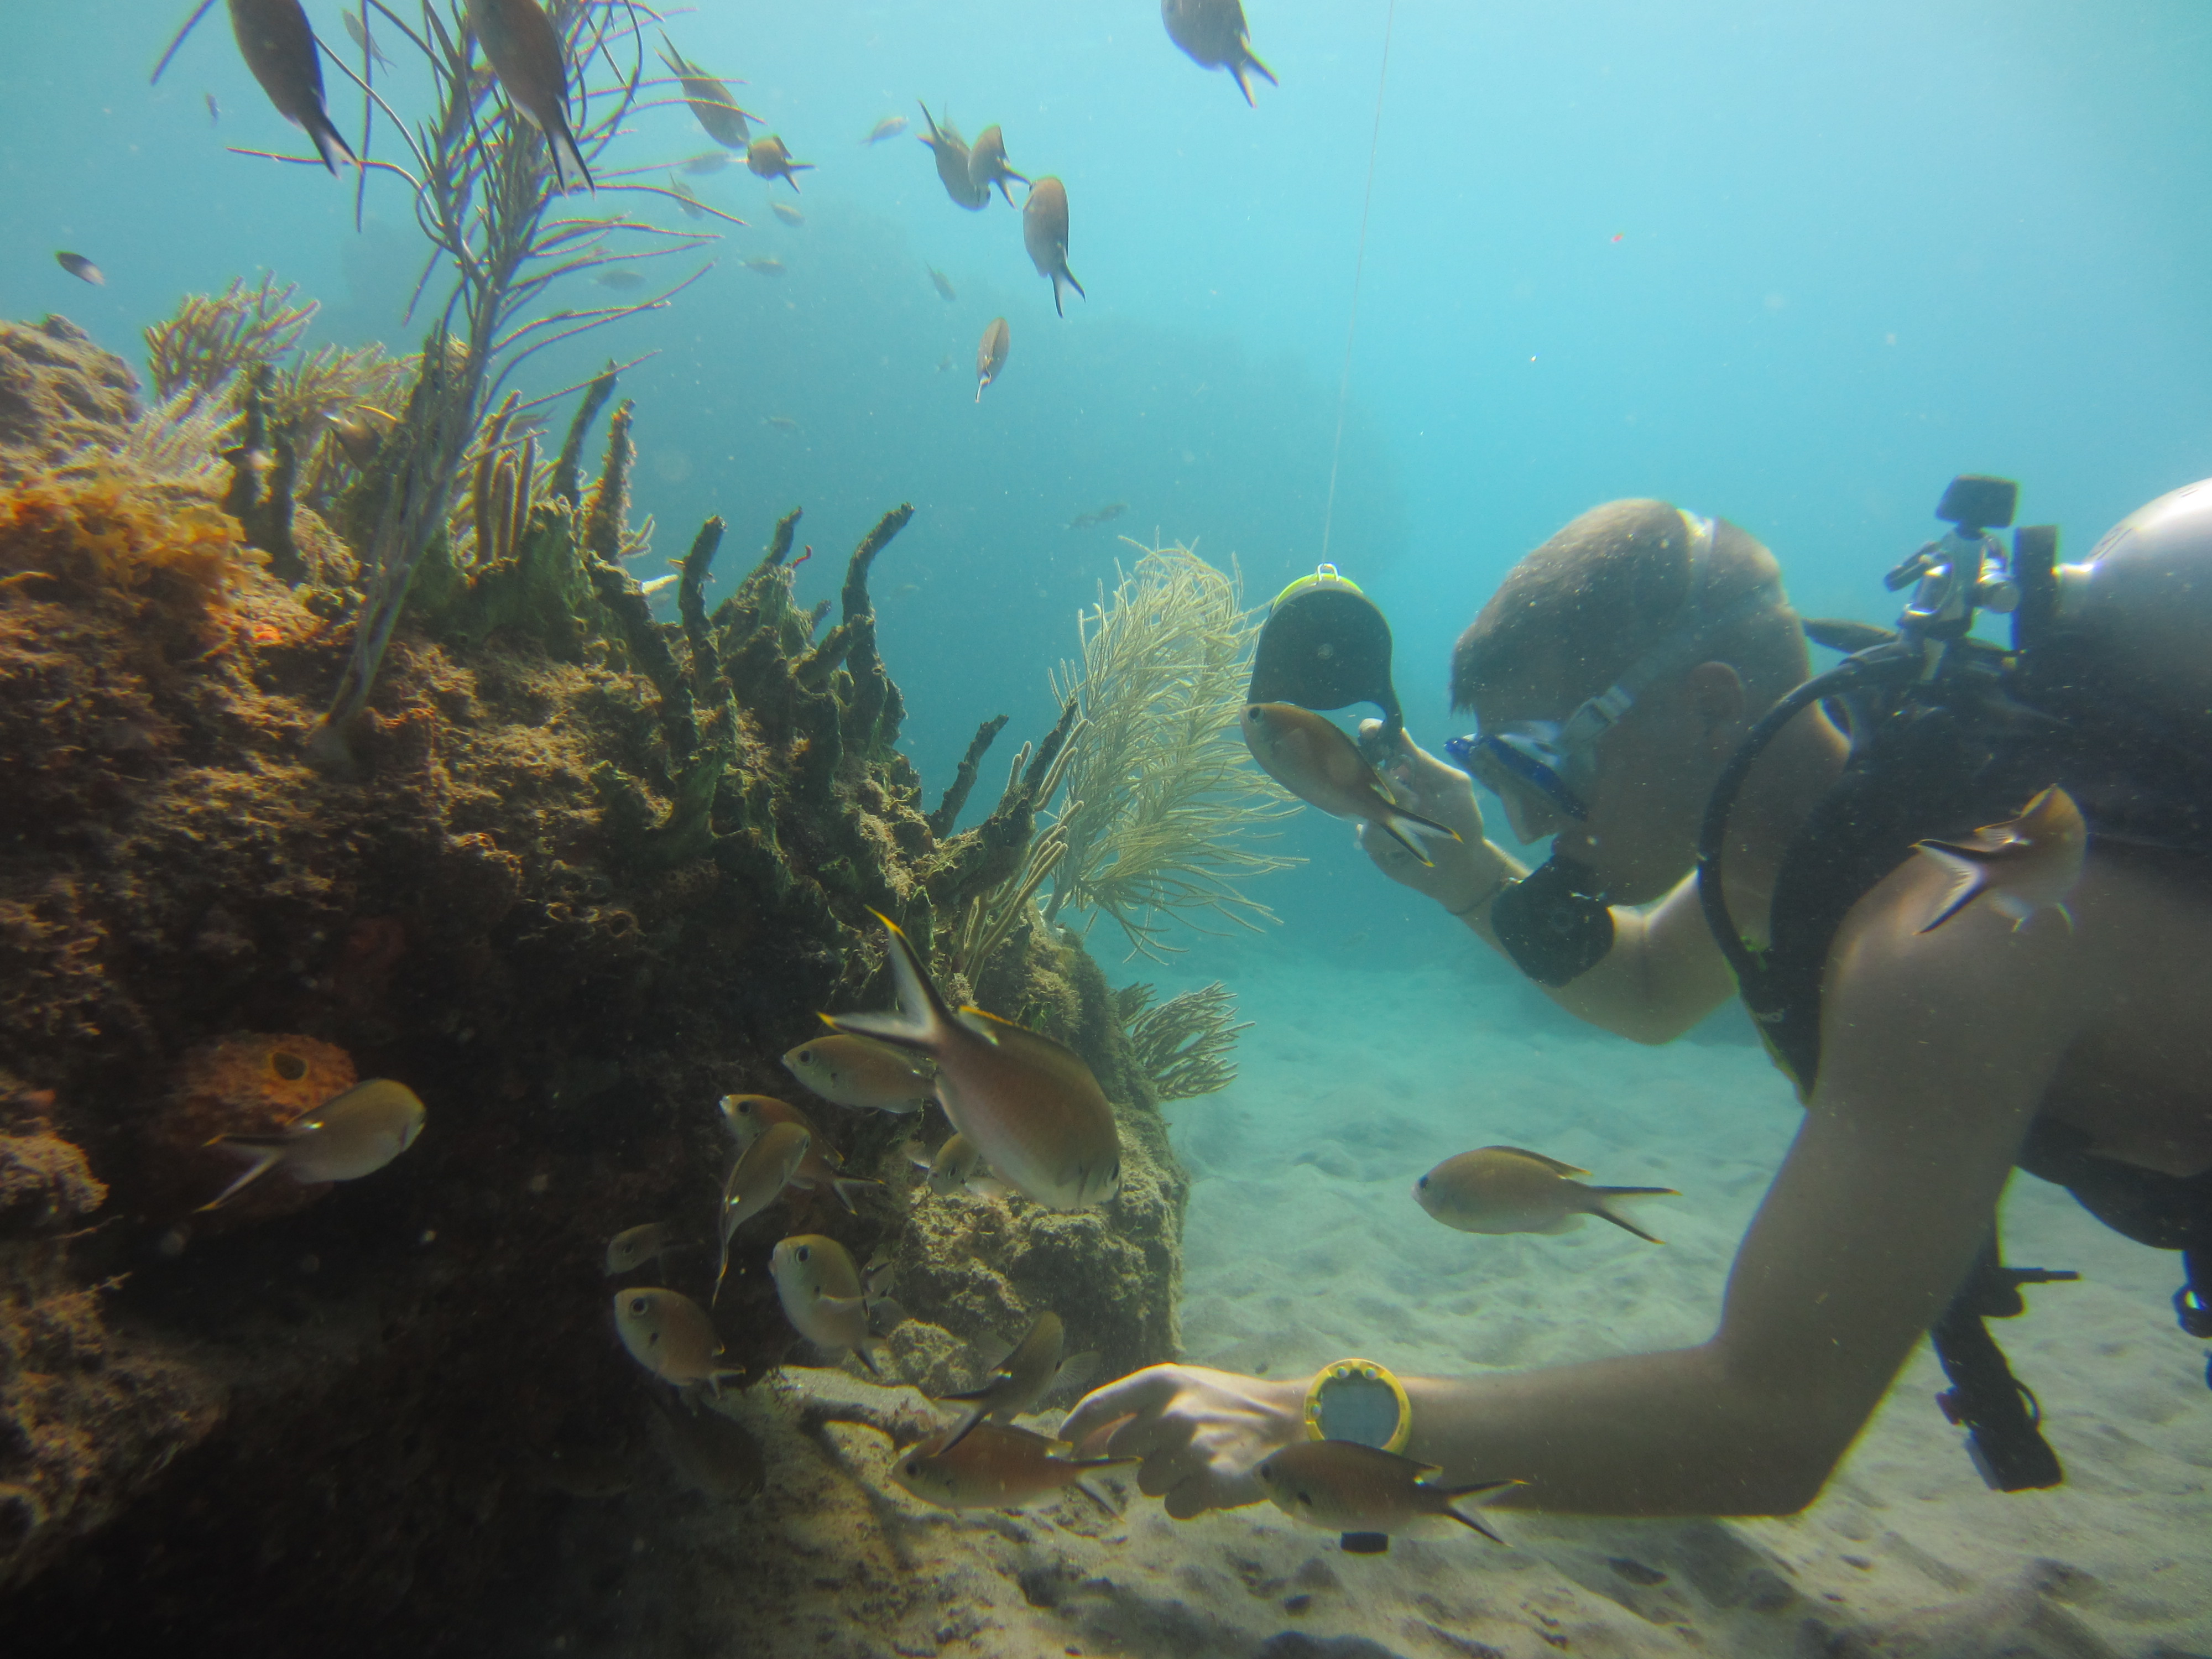 A volunteer surveying the health of the reef - Montserrat